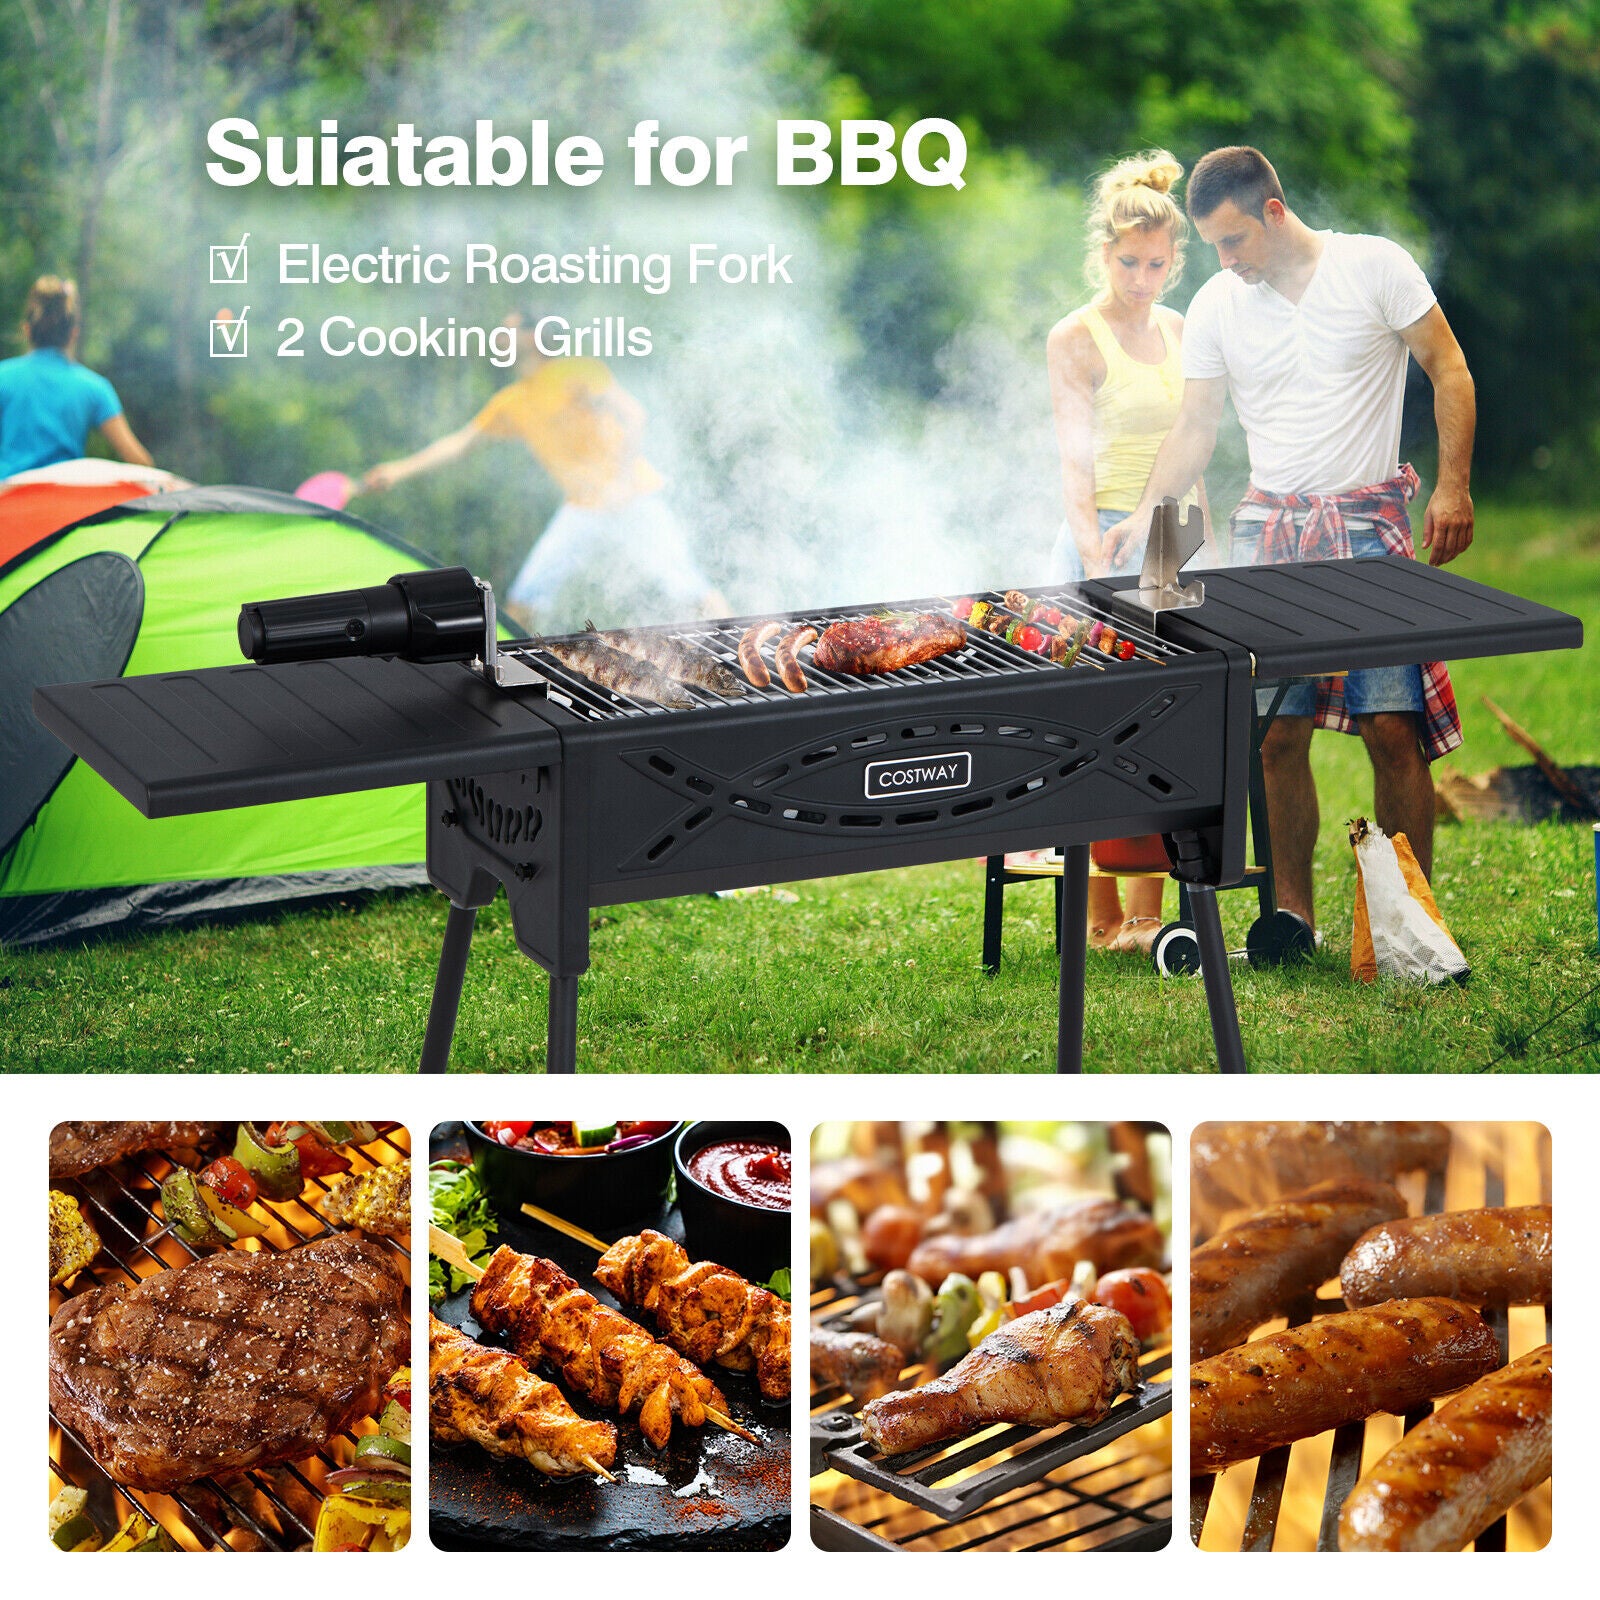 Charcoal Grill With Electric Roasting Fork - Portable Grill